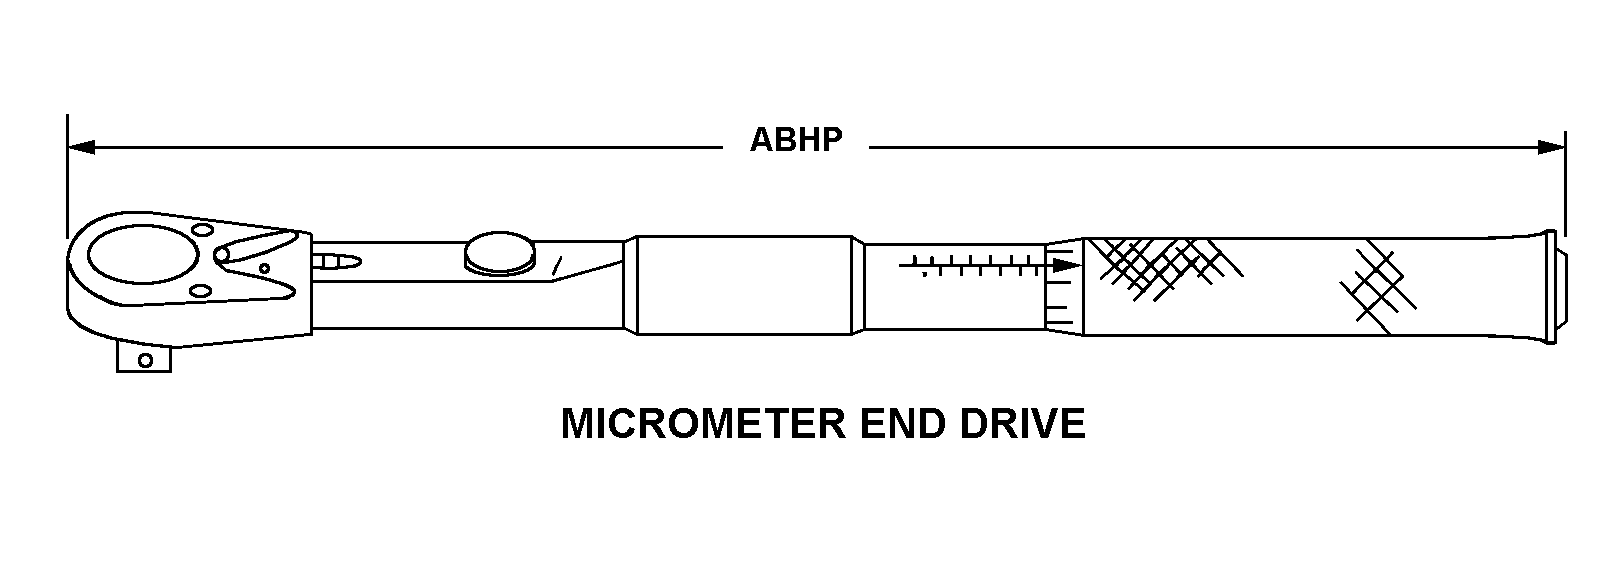 MICROMETER END DRIVE style nsn 5120-01-430-4459